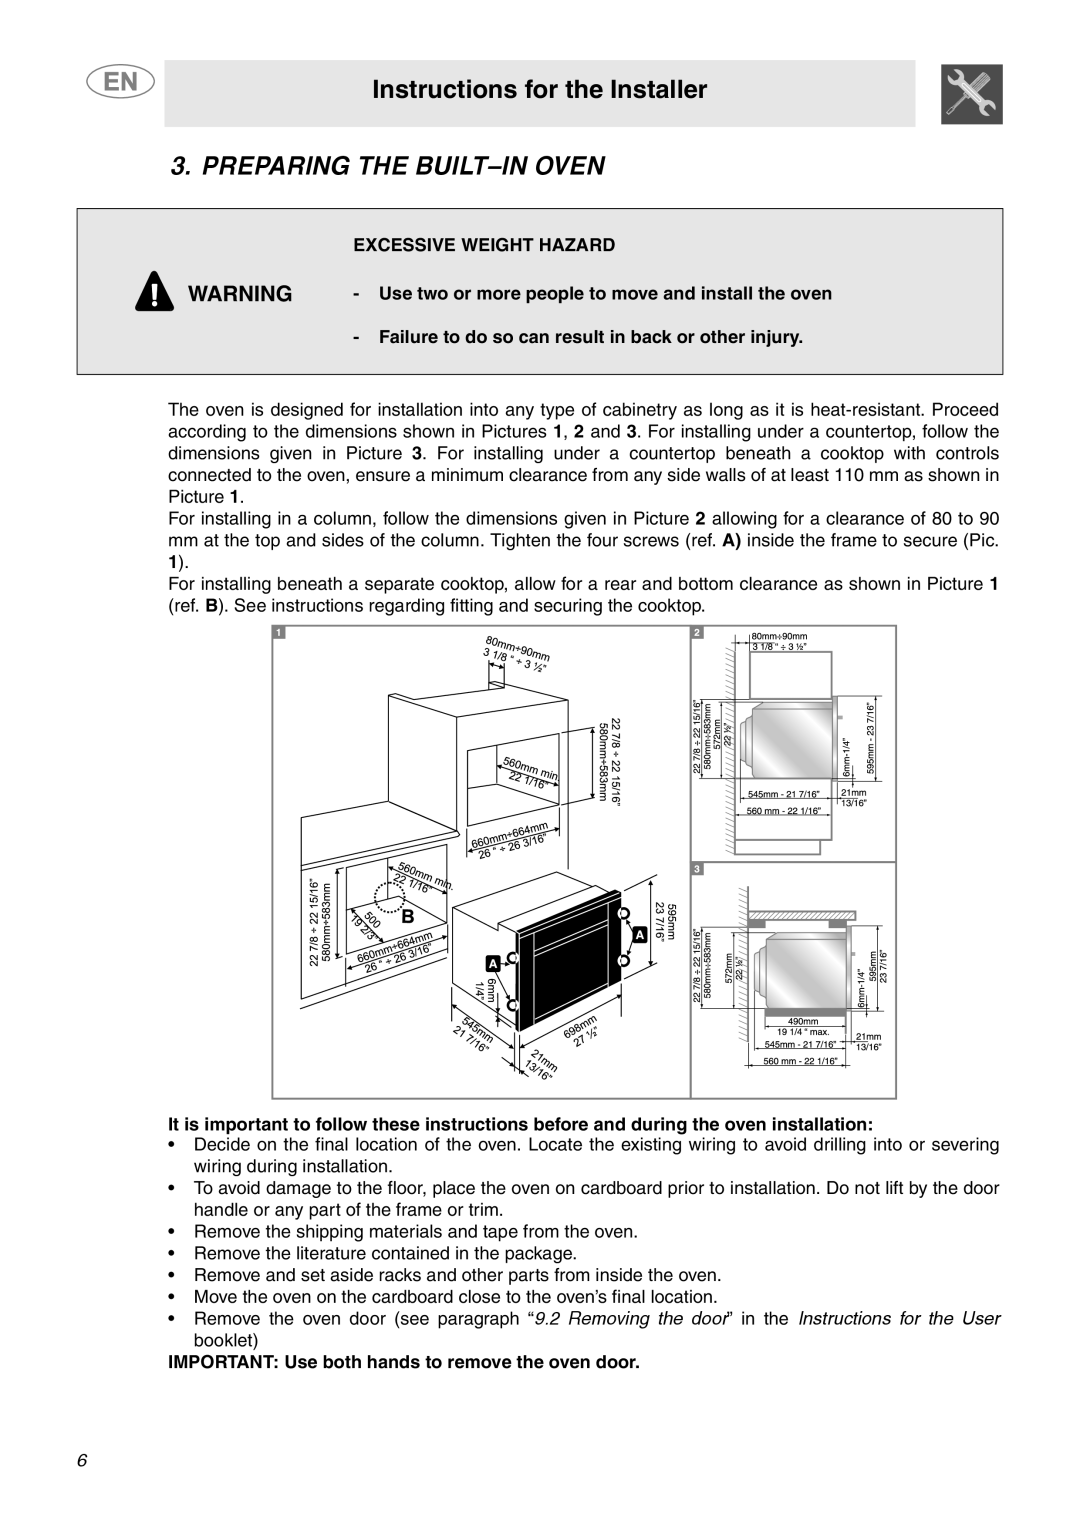 Smeg SC709XU important safety instructions Instructions for the Installer, Preparing The Built-Inoven 